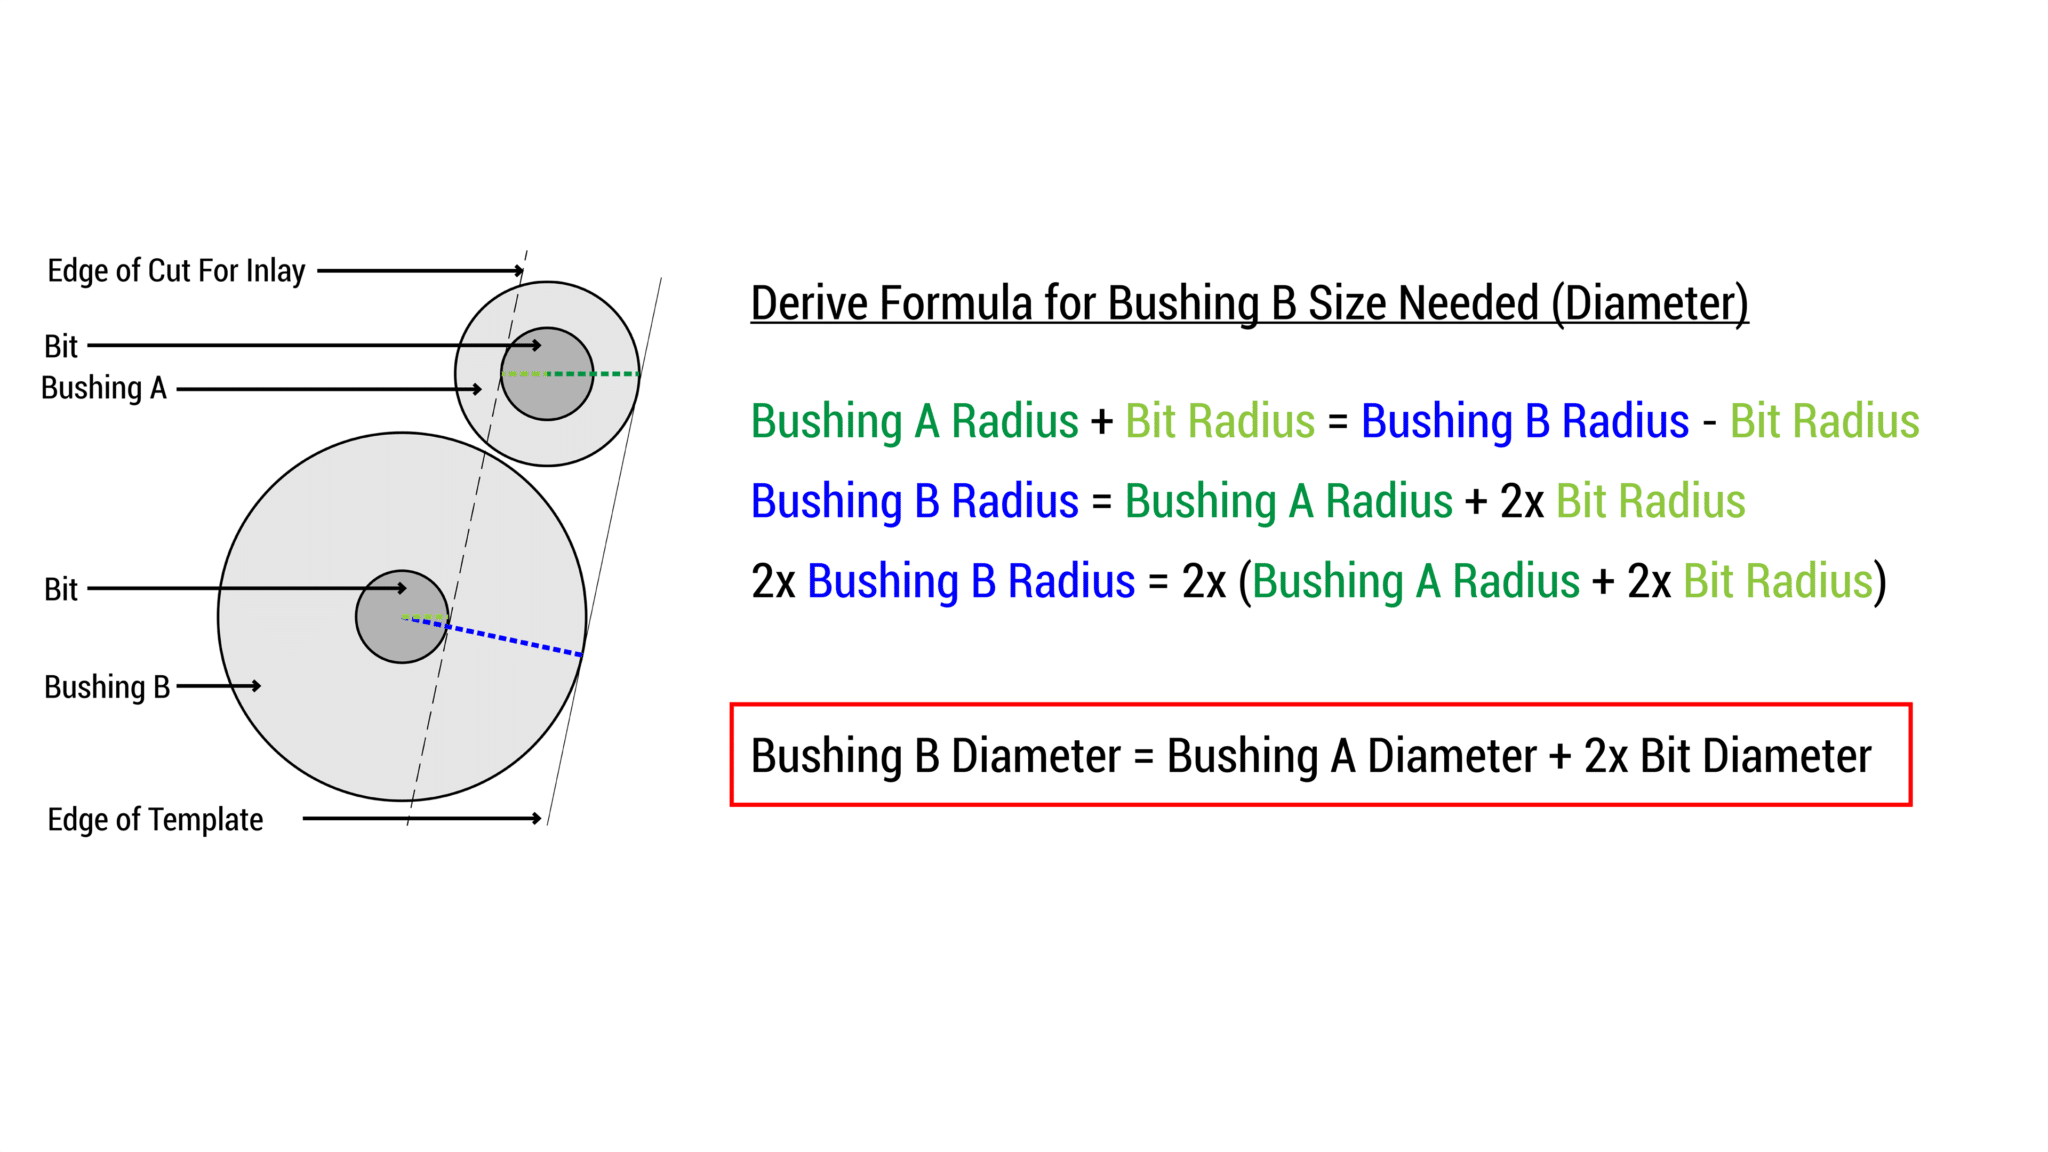 Formula for determining the sizes needed for an inlay using guide bushings